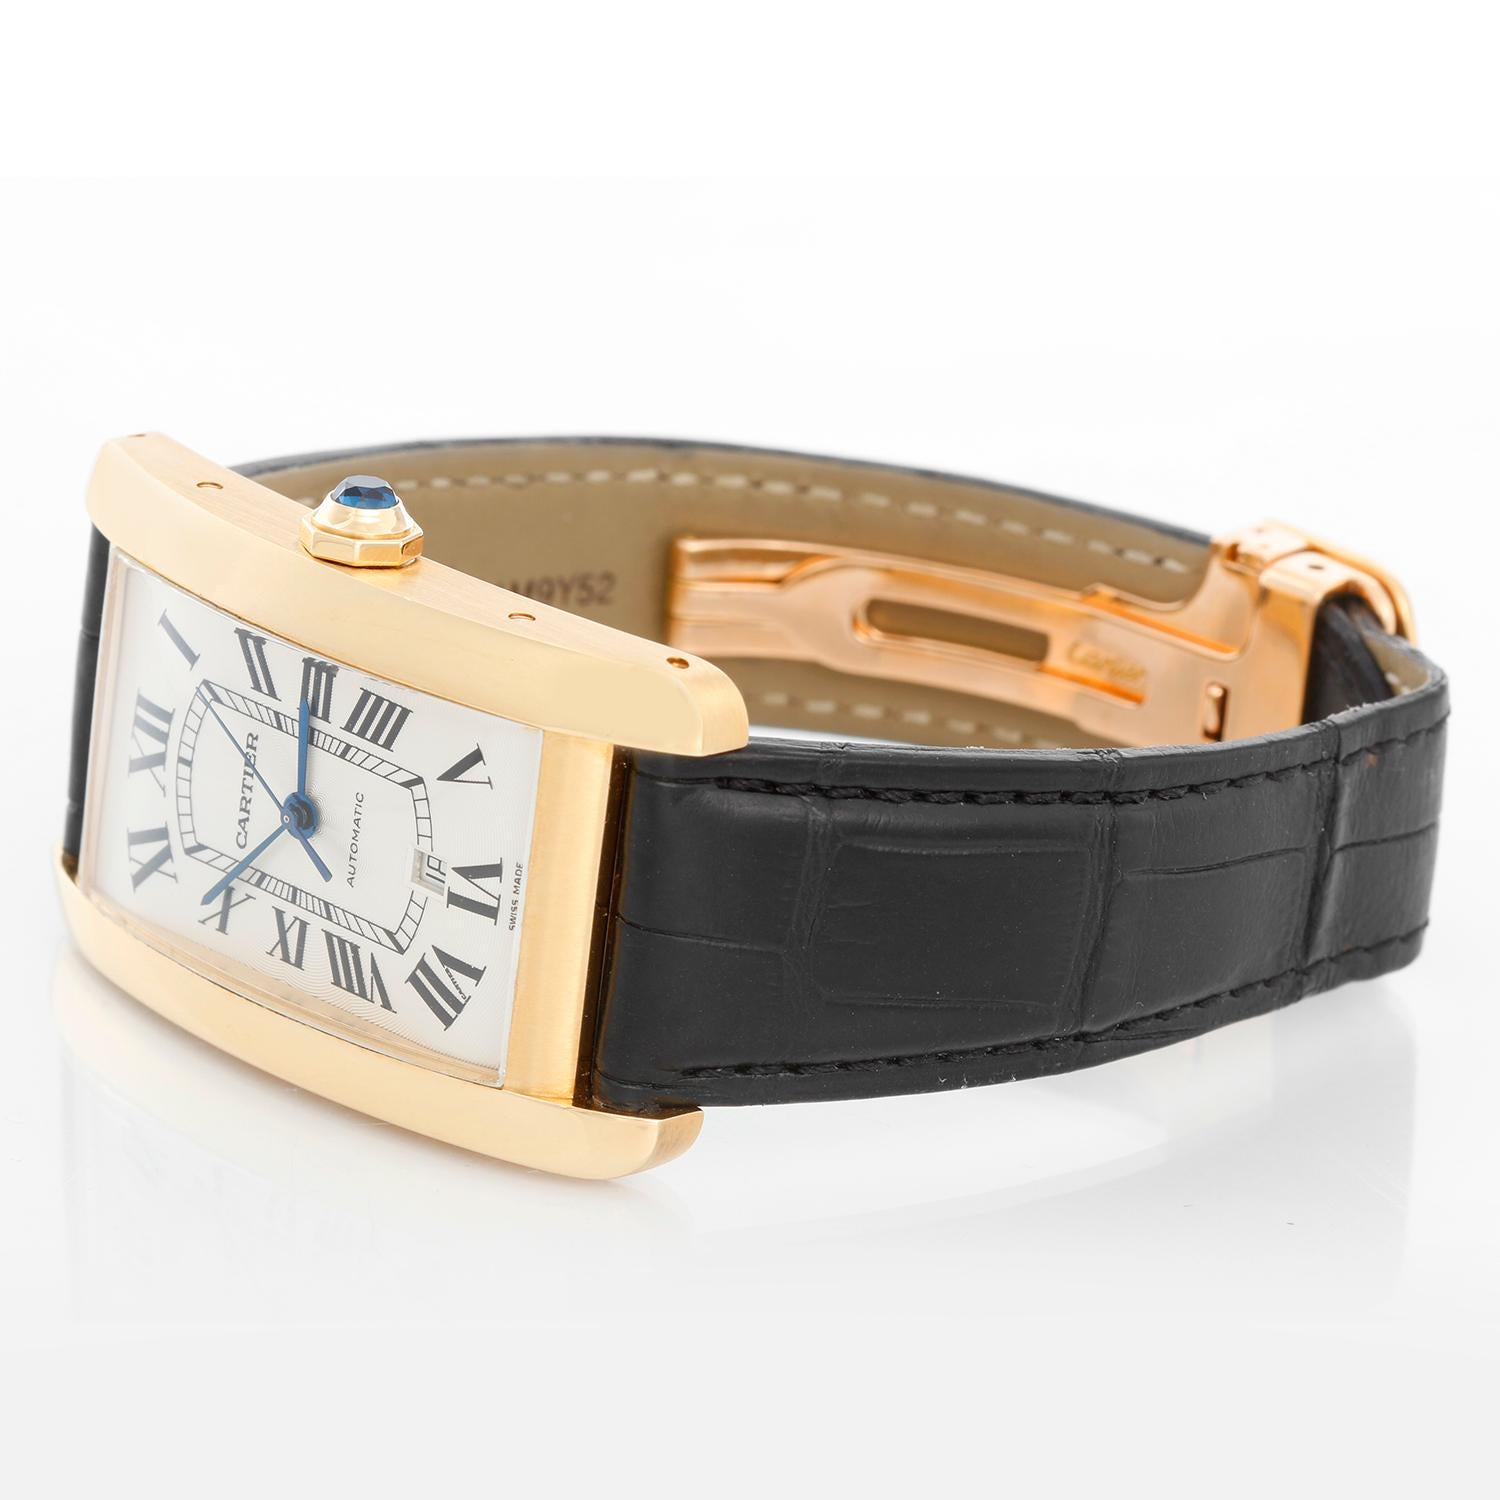 Cartier Tank Americaine 18k Yellow Gold Automatic XL Mens - Automatic winding. 18k yellow gold case (32 mm x 52mm). Silvered flinqué dial. Cartier Alligator strap with 18k rose gold Cartier buckle. Pre-owned with Cartier box and books. The watch is